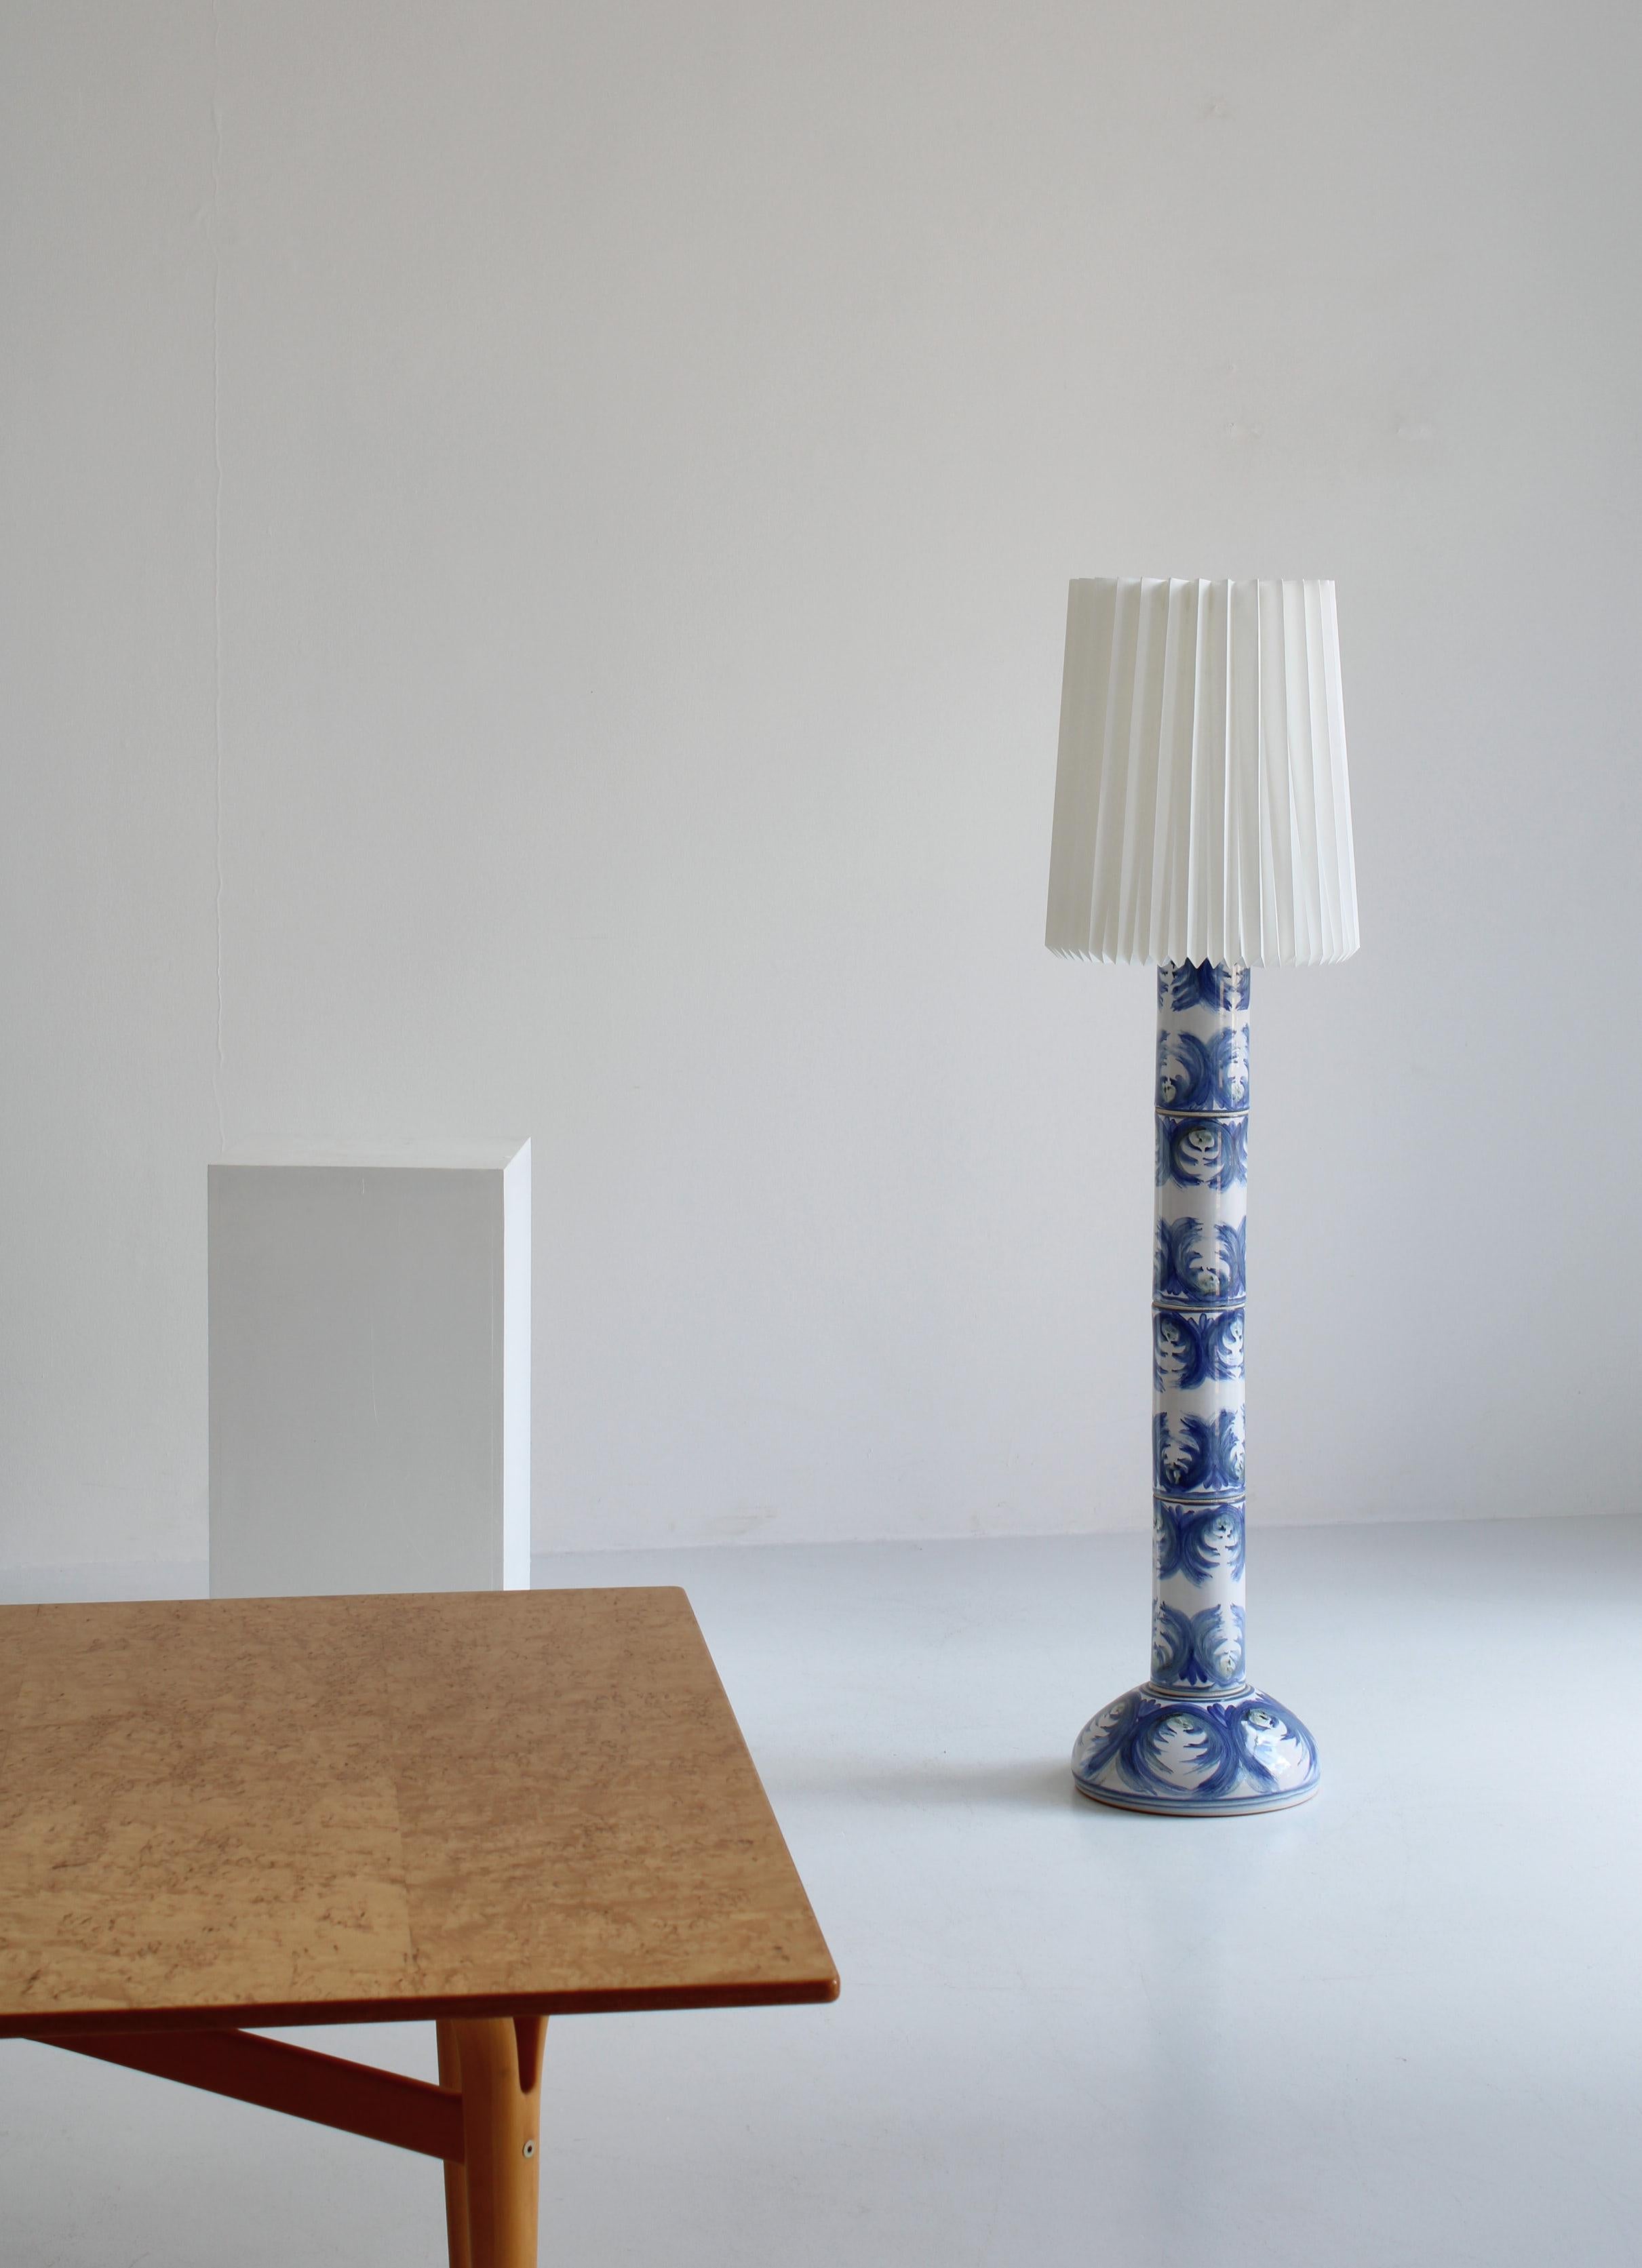 Large and unique floor lamp handmade and decorated by Danish ceramic artist Viggo Kyhn at his own workshop in the 1960s. The lamp base is made from earthenware that has been decorated by hand in bluish strokes and finally glazed. The lamp is